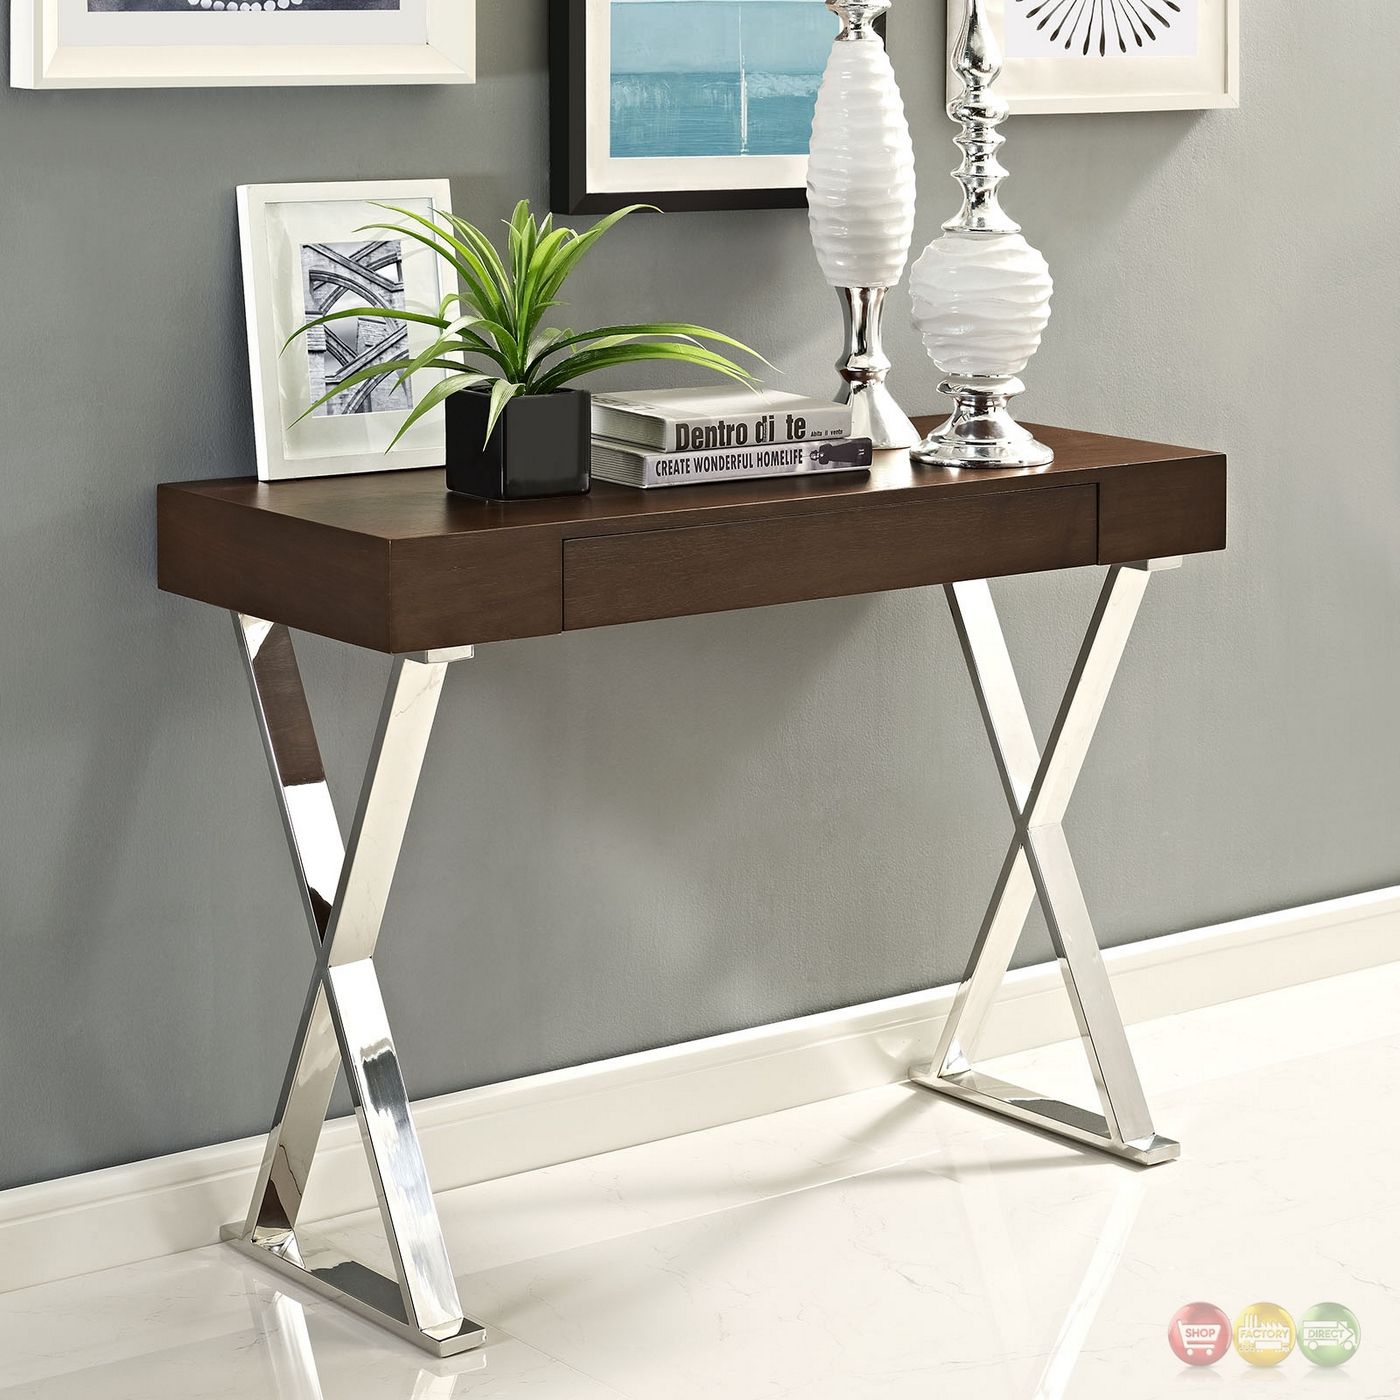 Sector Modernistic Console Table With High Gloss Top & Chrome Base, Brown Intended For Square High Gloss Console Tables (View 20 of 20)